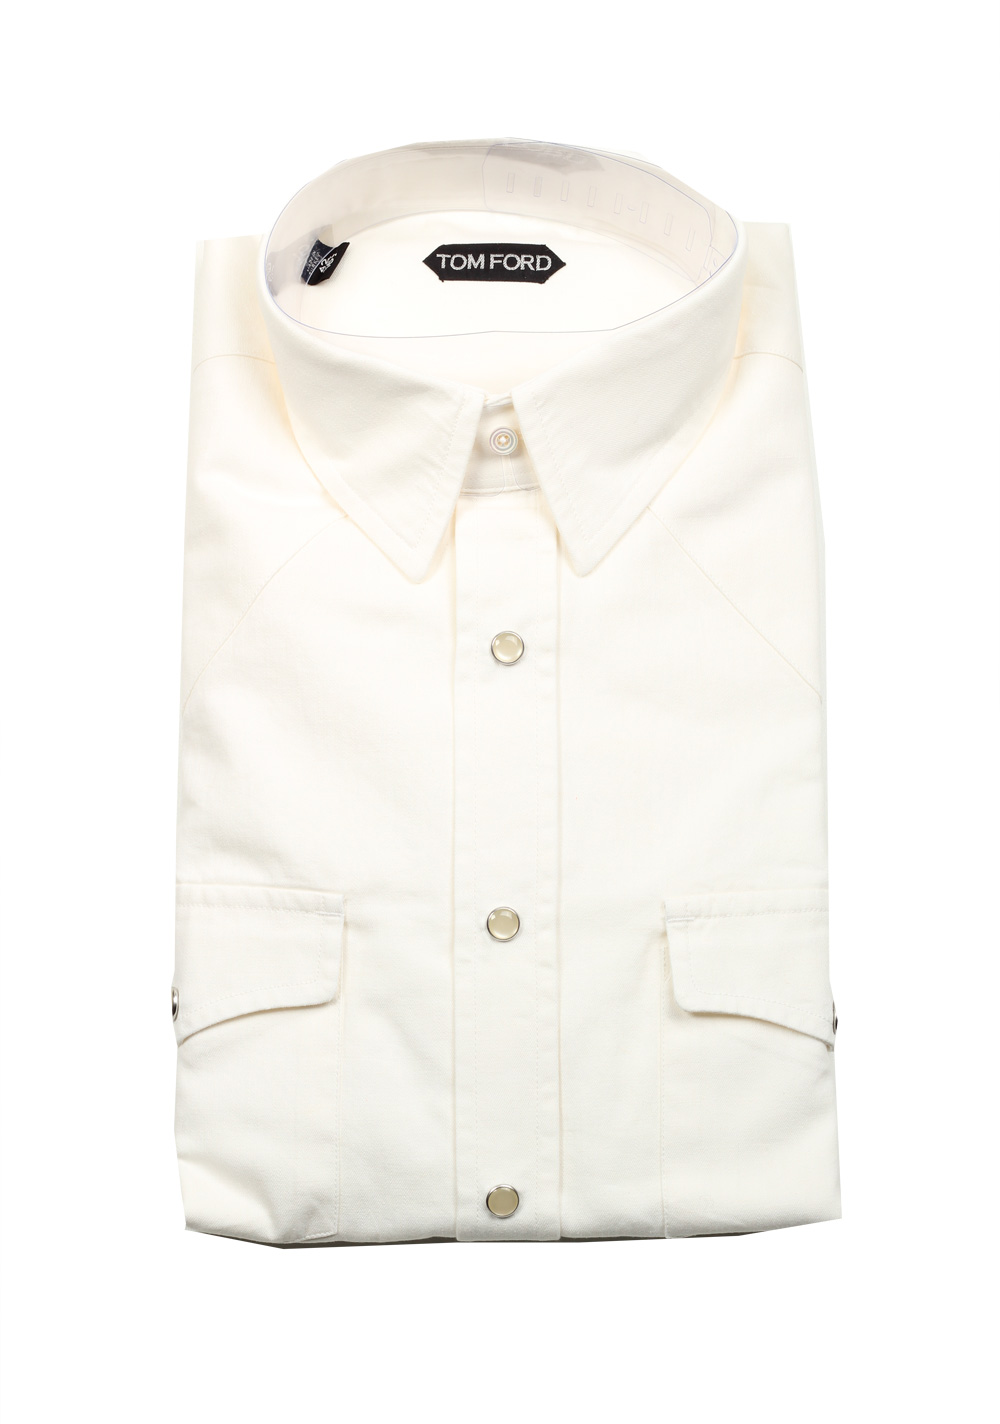 TOM FORD Solid White Casual Shirt Size 42 / 16,5 U.S. | Costume Limité